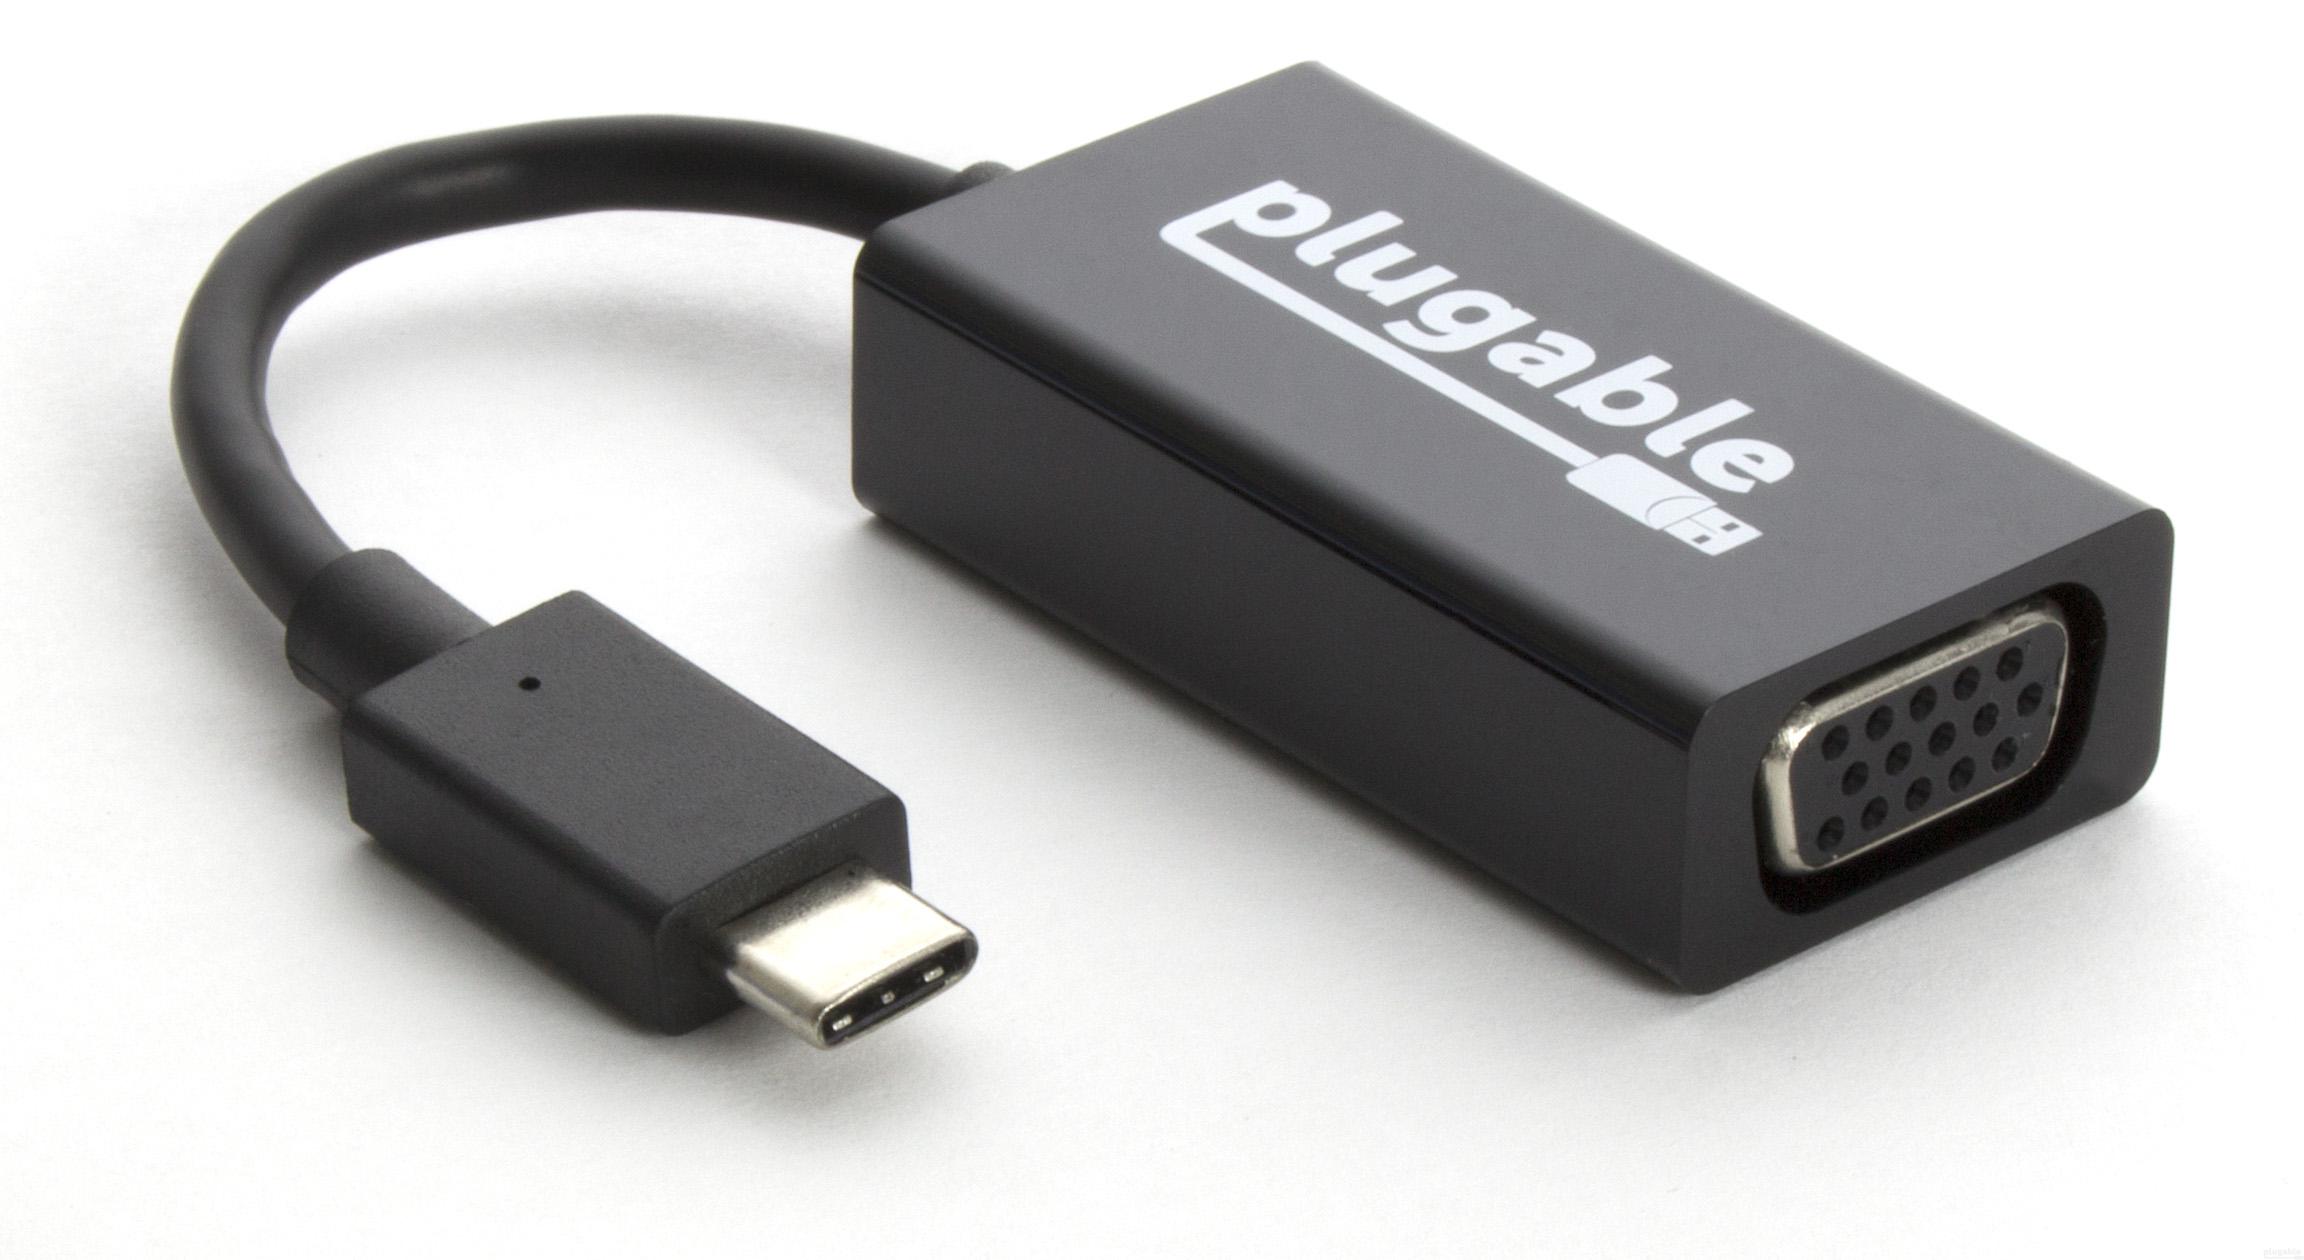 Plugable USB C to VGA Adapter Compatible with 2018 iPad Pro, 2018 MacBook Air, 2018 MacBook Pro, Surface Book 2, Thunderbolt 3 & More (Support for resultions up to 1920x1200 @ 60Hz) - image 1 of 8